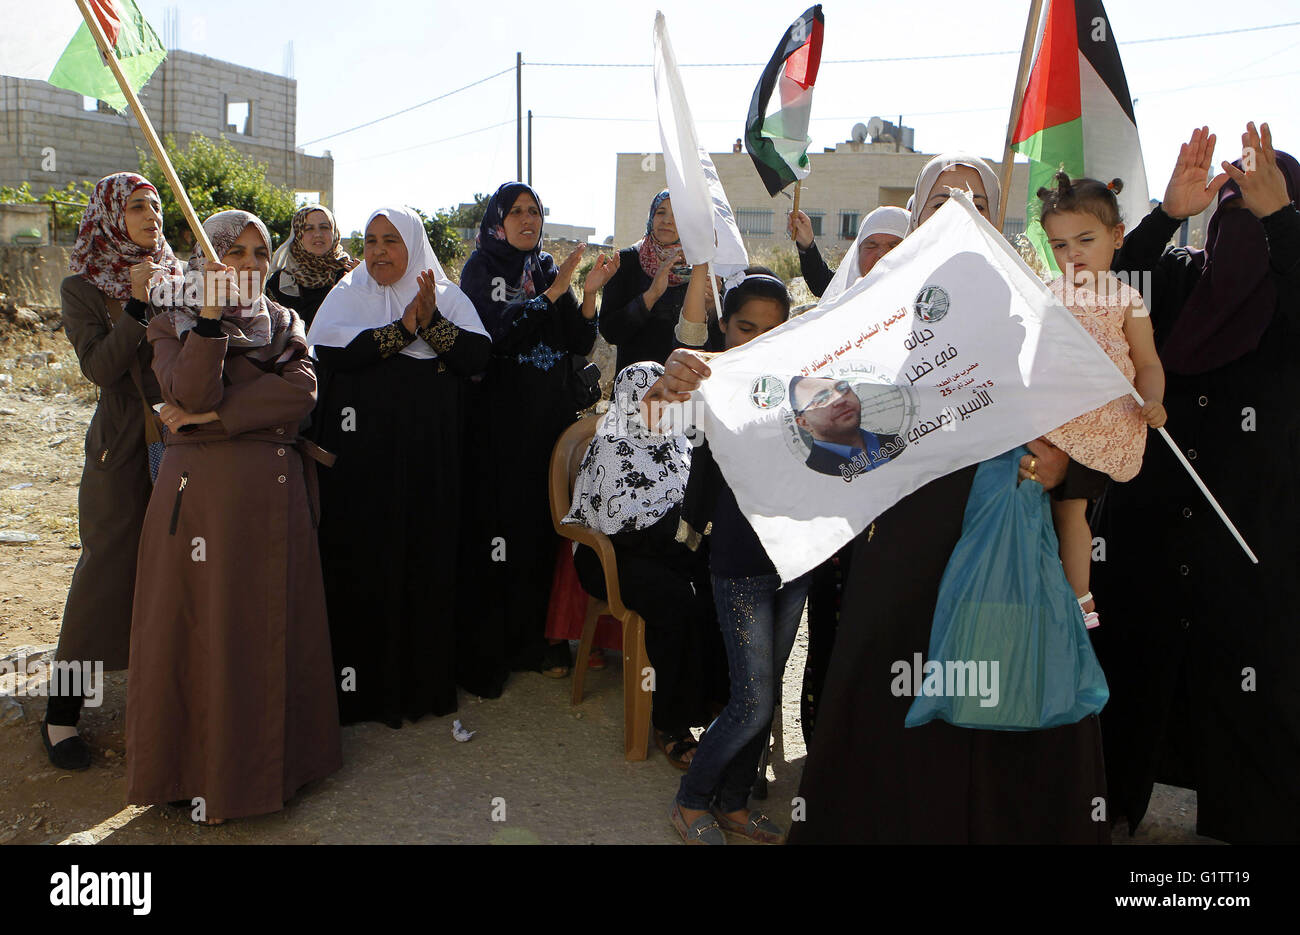 Hebron, West Bank, Palestinian Territory. 19th May, 2016. Palestinians wave national flags on May 19, 2016 in the southern West Bank village of Dura, as they wait for the arrival of Palestinian imprisoned journalist, Mohammed al-Qiq, after he was released from the Israeli Nafha Prison. Mohammed al-Qiq, 33, held by Israel without trial, agreed on February 26, 2016 to end his 94-day hunger strike under a deal for his release in May. Mohammed al-Qiq was released near the Jewish settlement of Beit Hagai, at the southern entrance to the occupied West Bank city of Hebron near his village (Credit Im Stock Photo